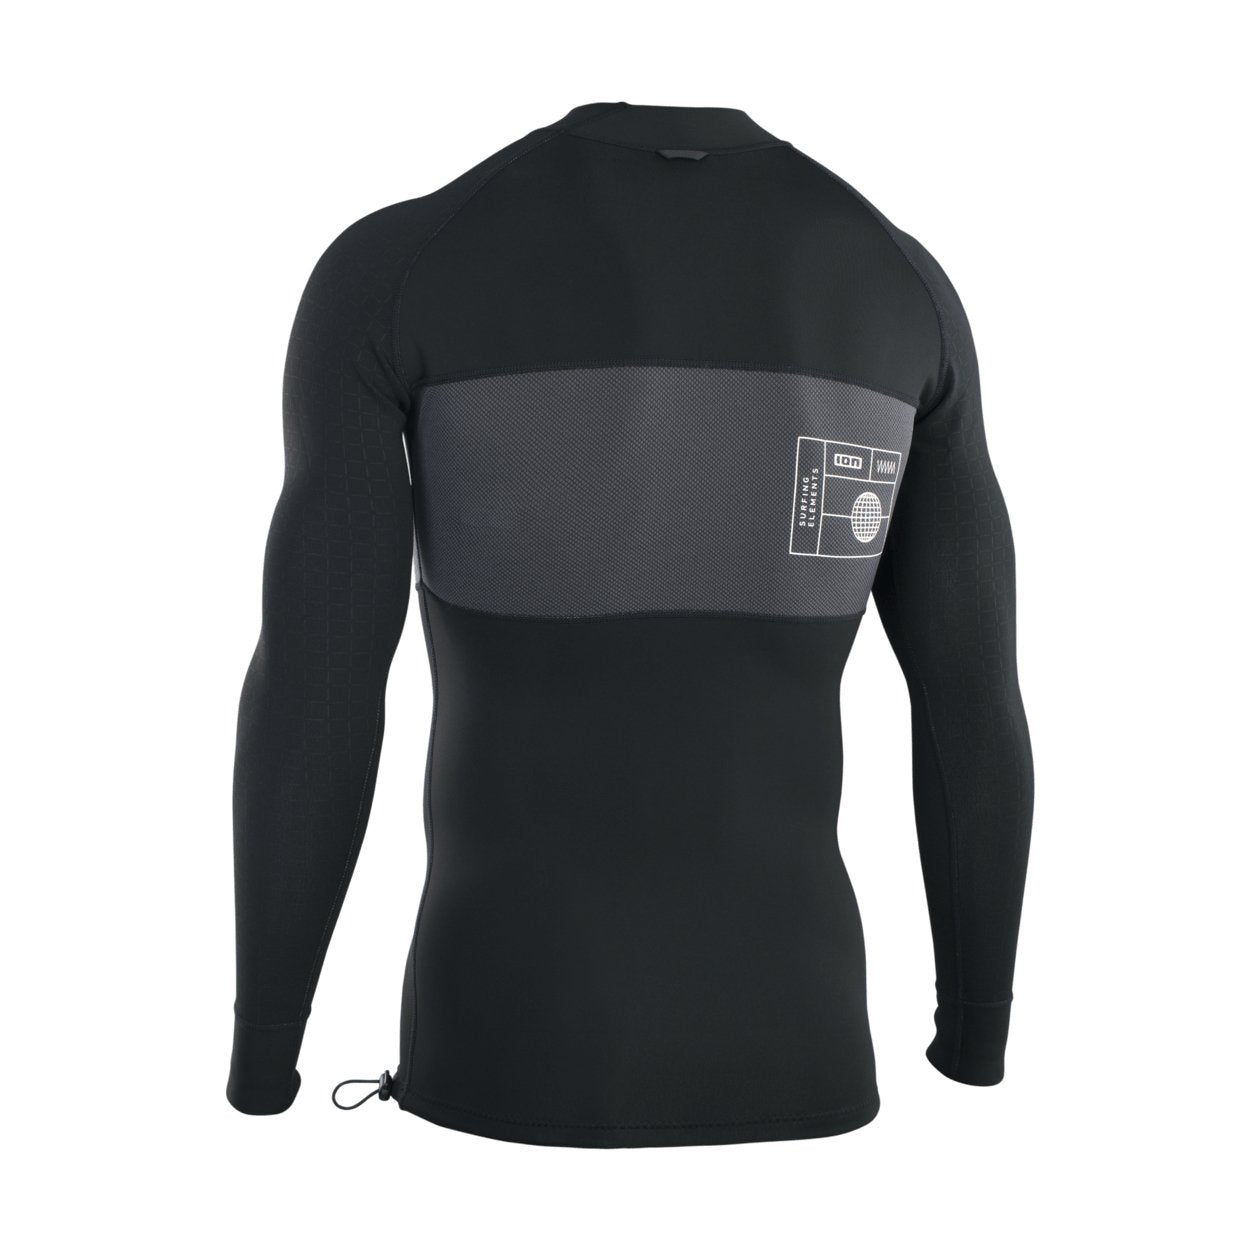 ION Neo Top 0.5 LS men 2023 - Worthing Watersports - 9010583091730 - Tops - ION Water